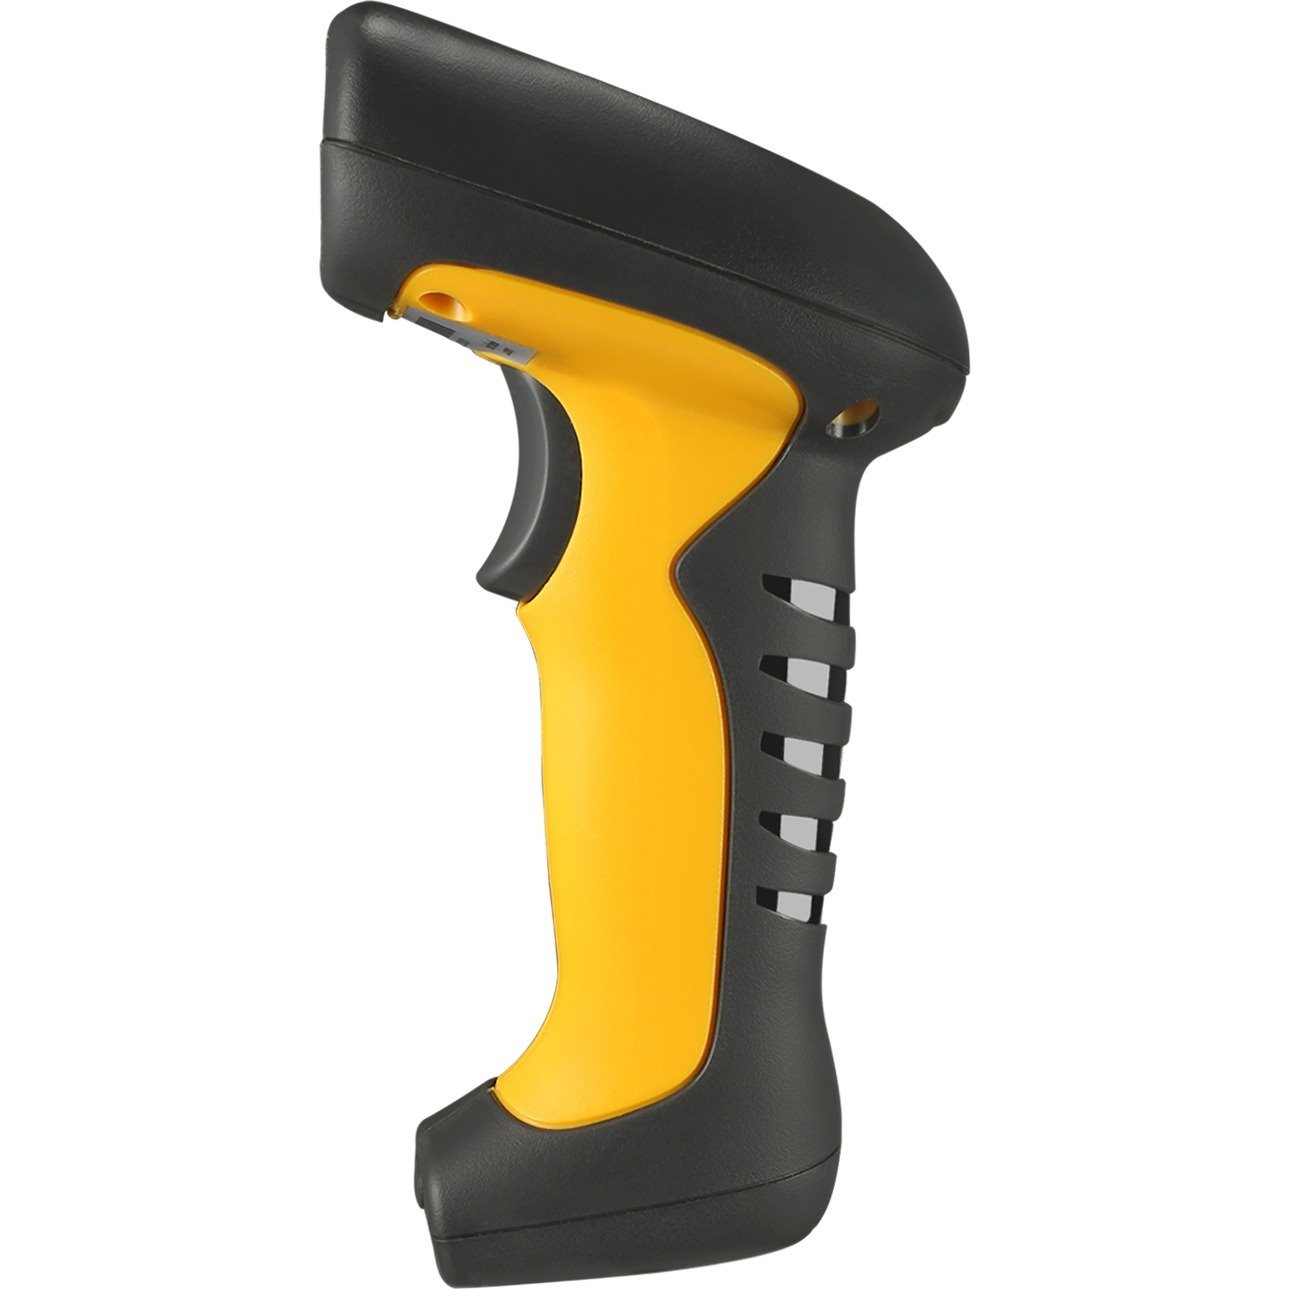 Adesso NuScan 5200TR Healthcare, Library, Warehouse, Logistics Handheld Barcode Scanner - Wireless Connectivity